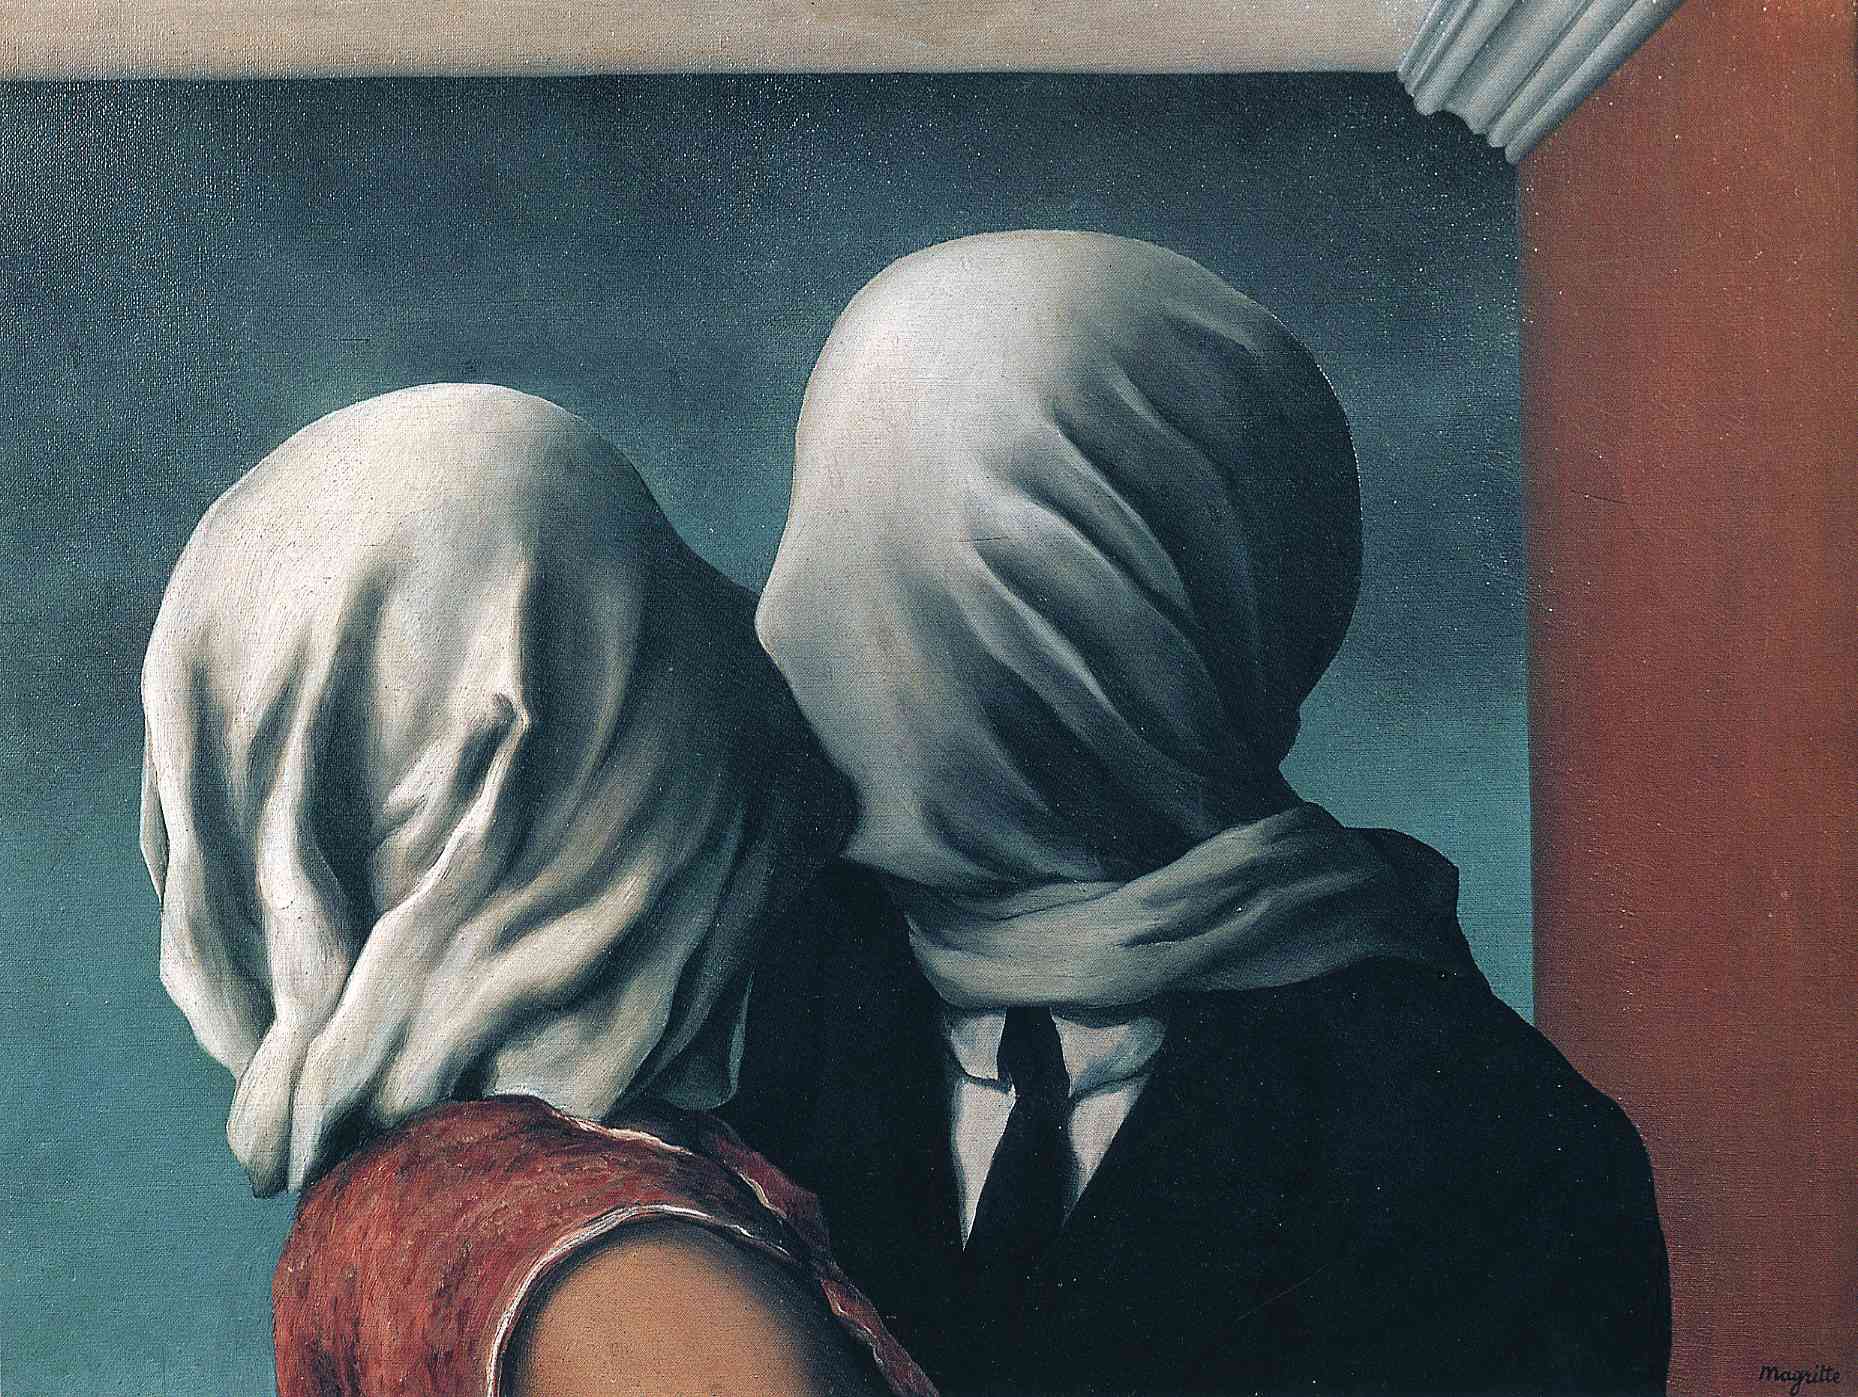 Os amantes by René Magritte - 1928 -  54 x 73.4 cm Museum of Modern Art